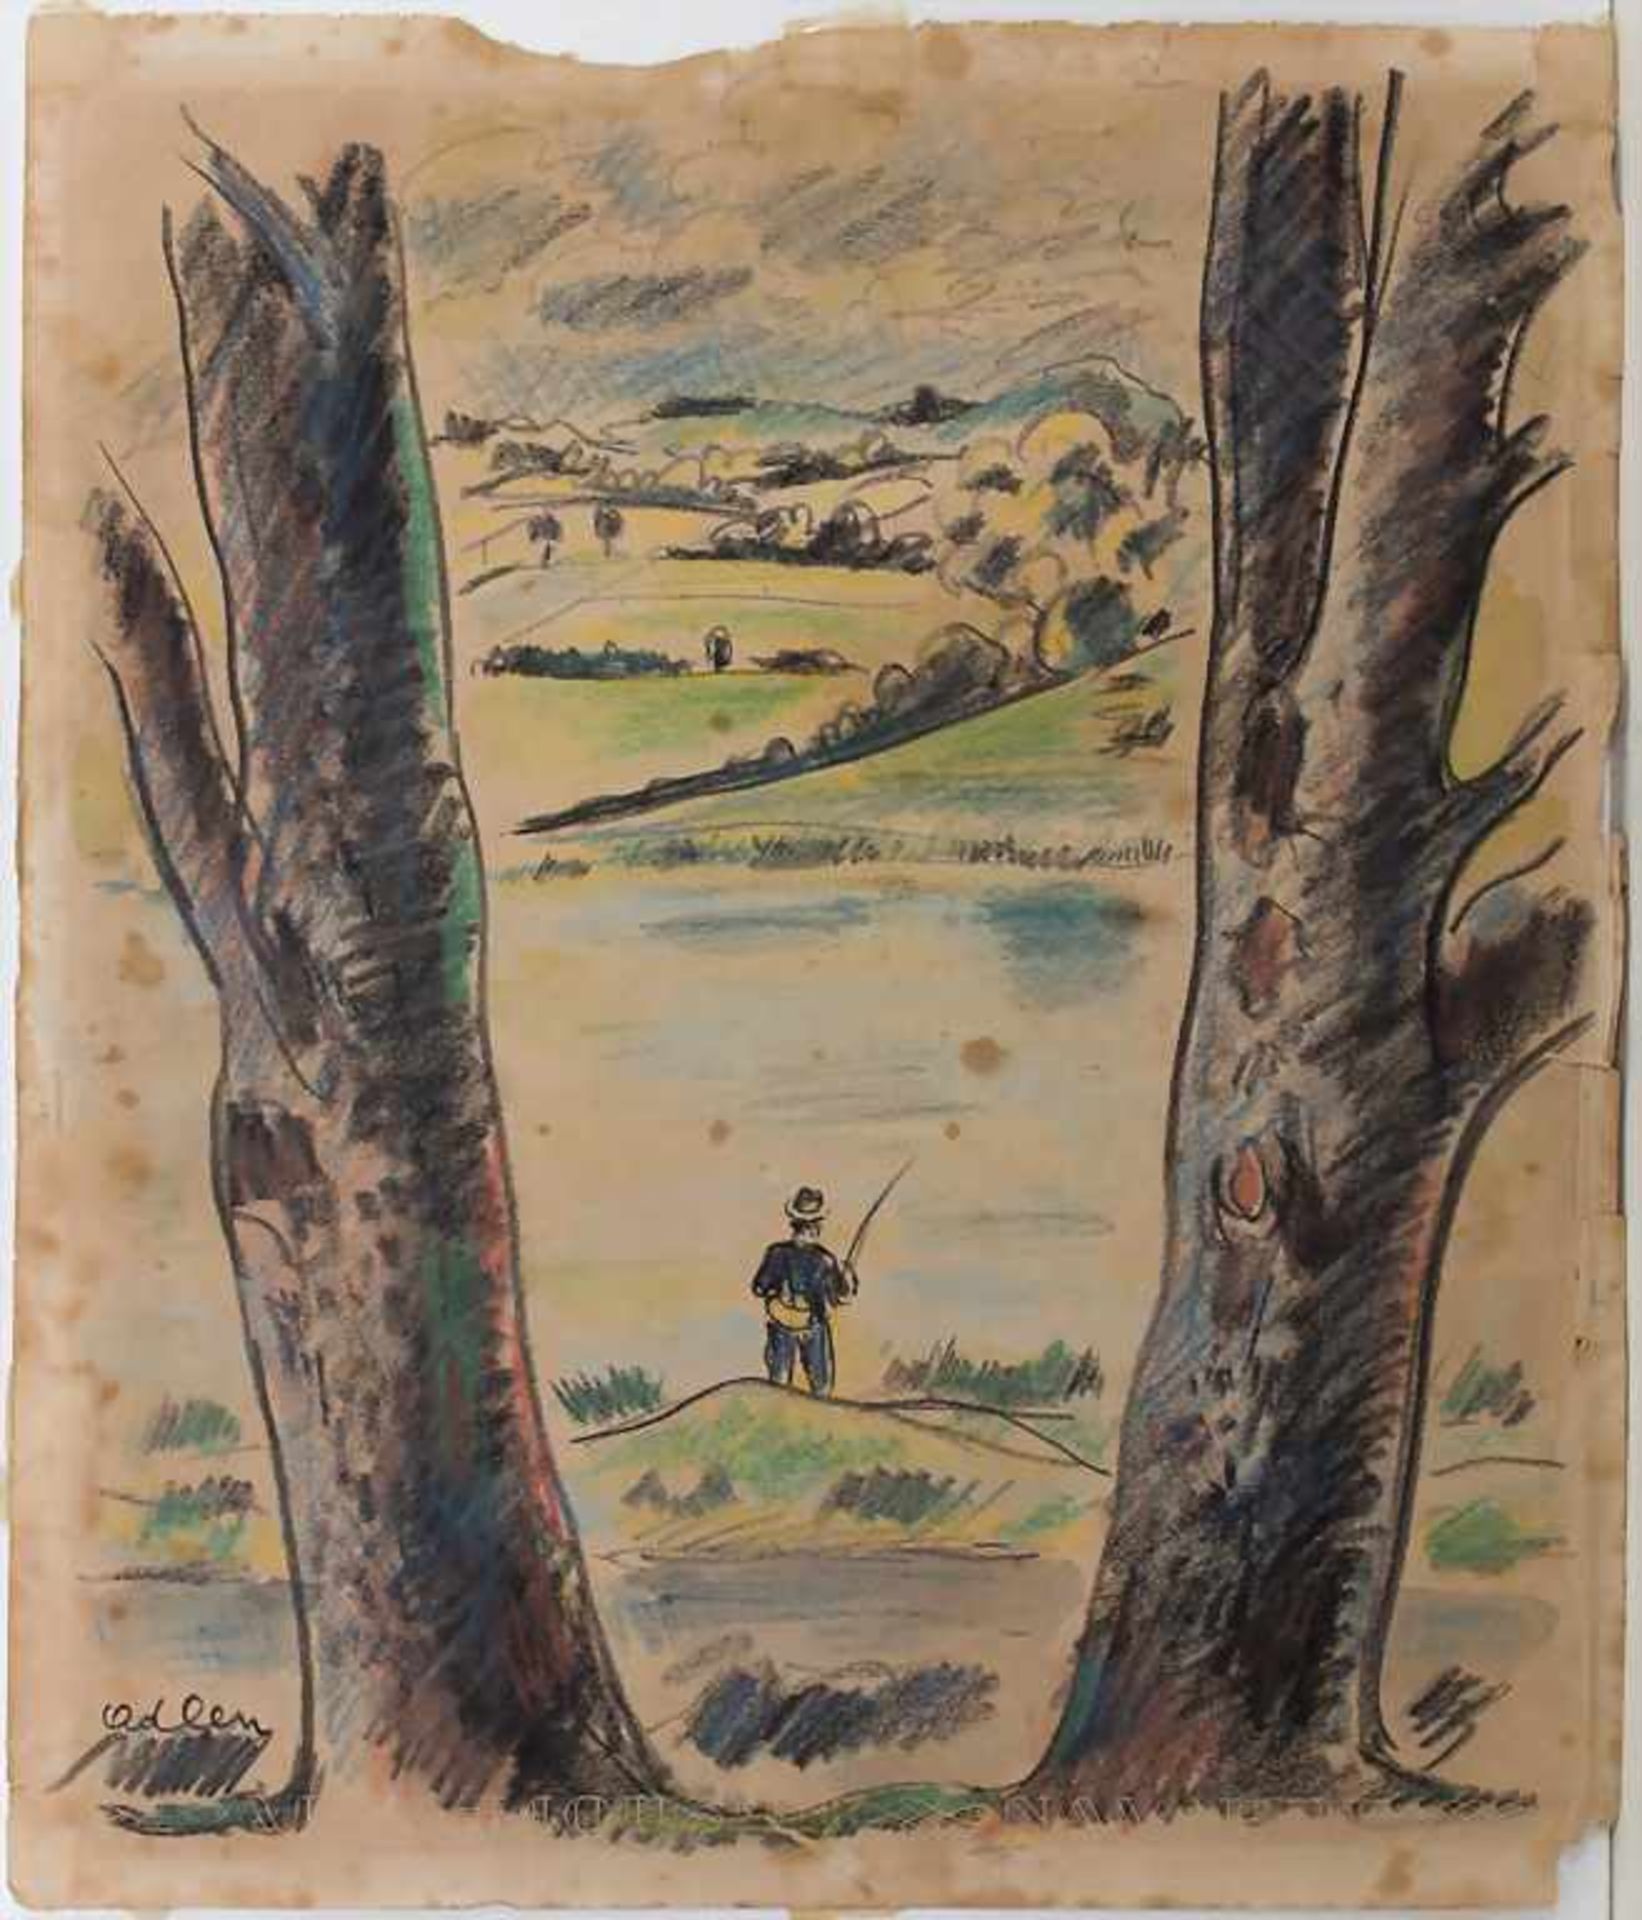 Michel Adlen (1898-1980), 'Angler am Flussufer' / 'A fisherman by the river'